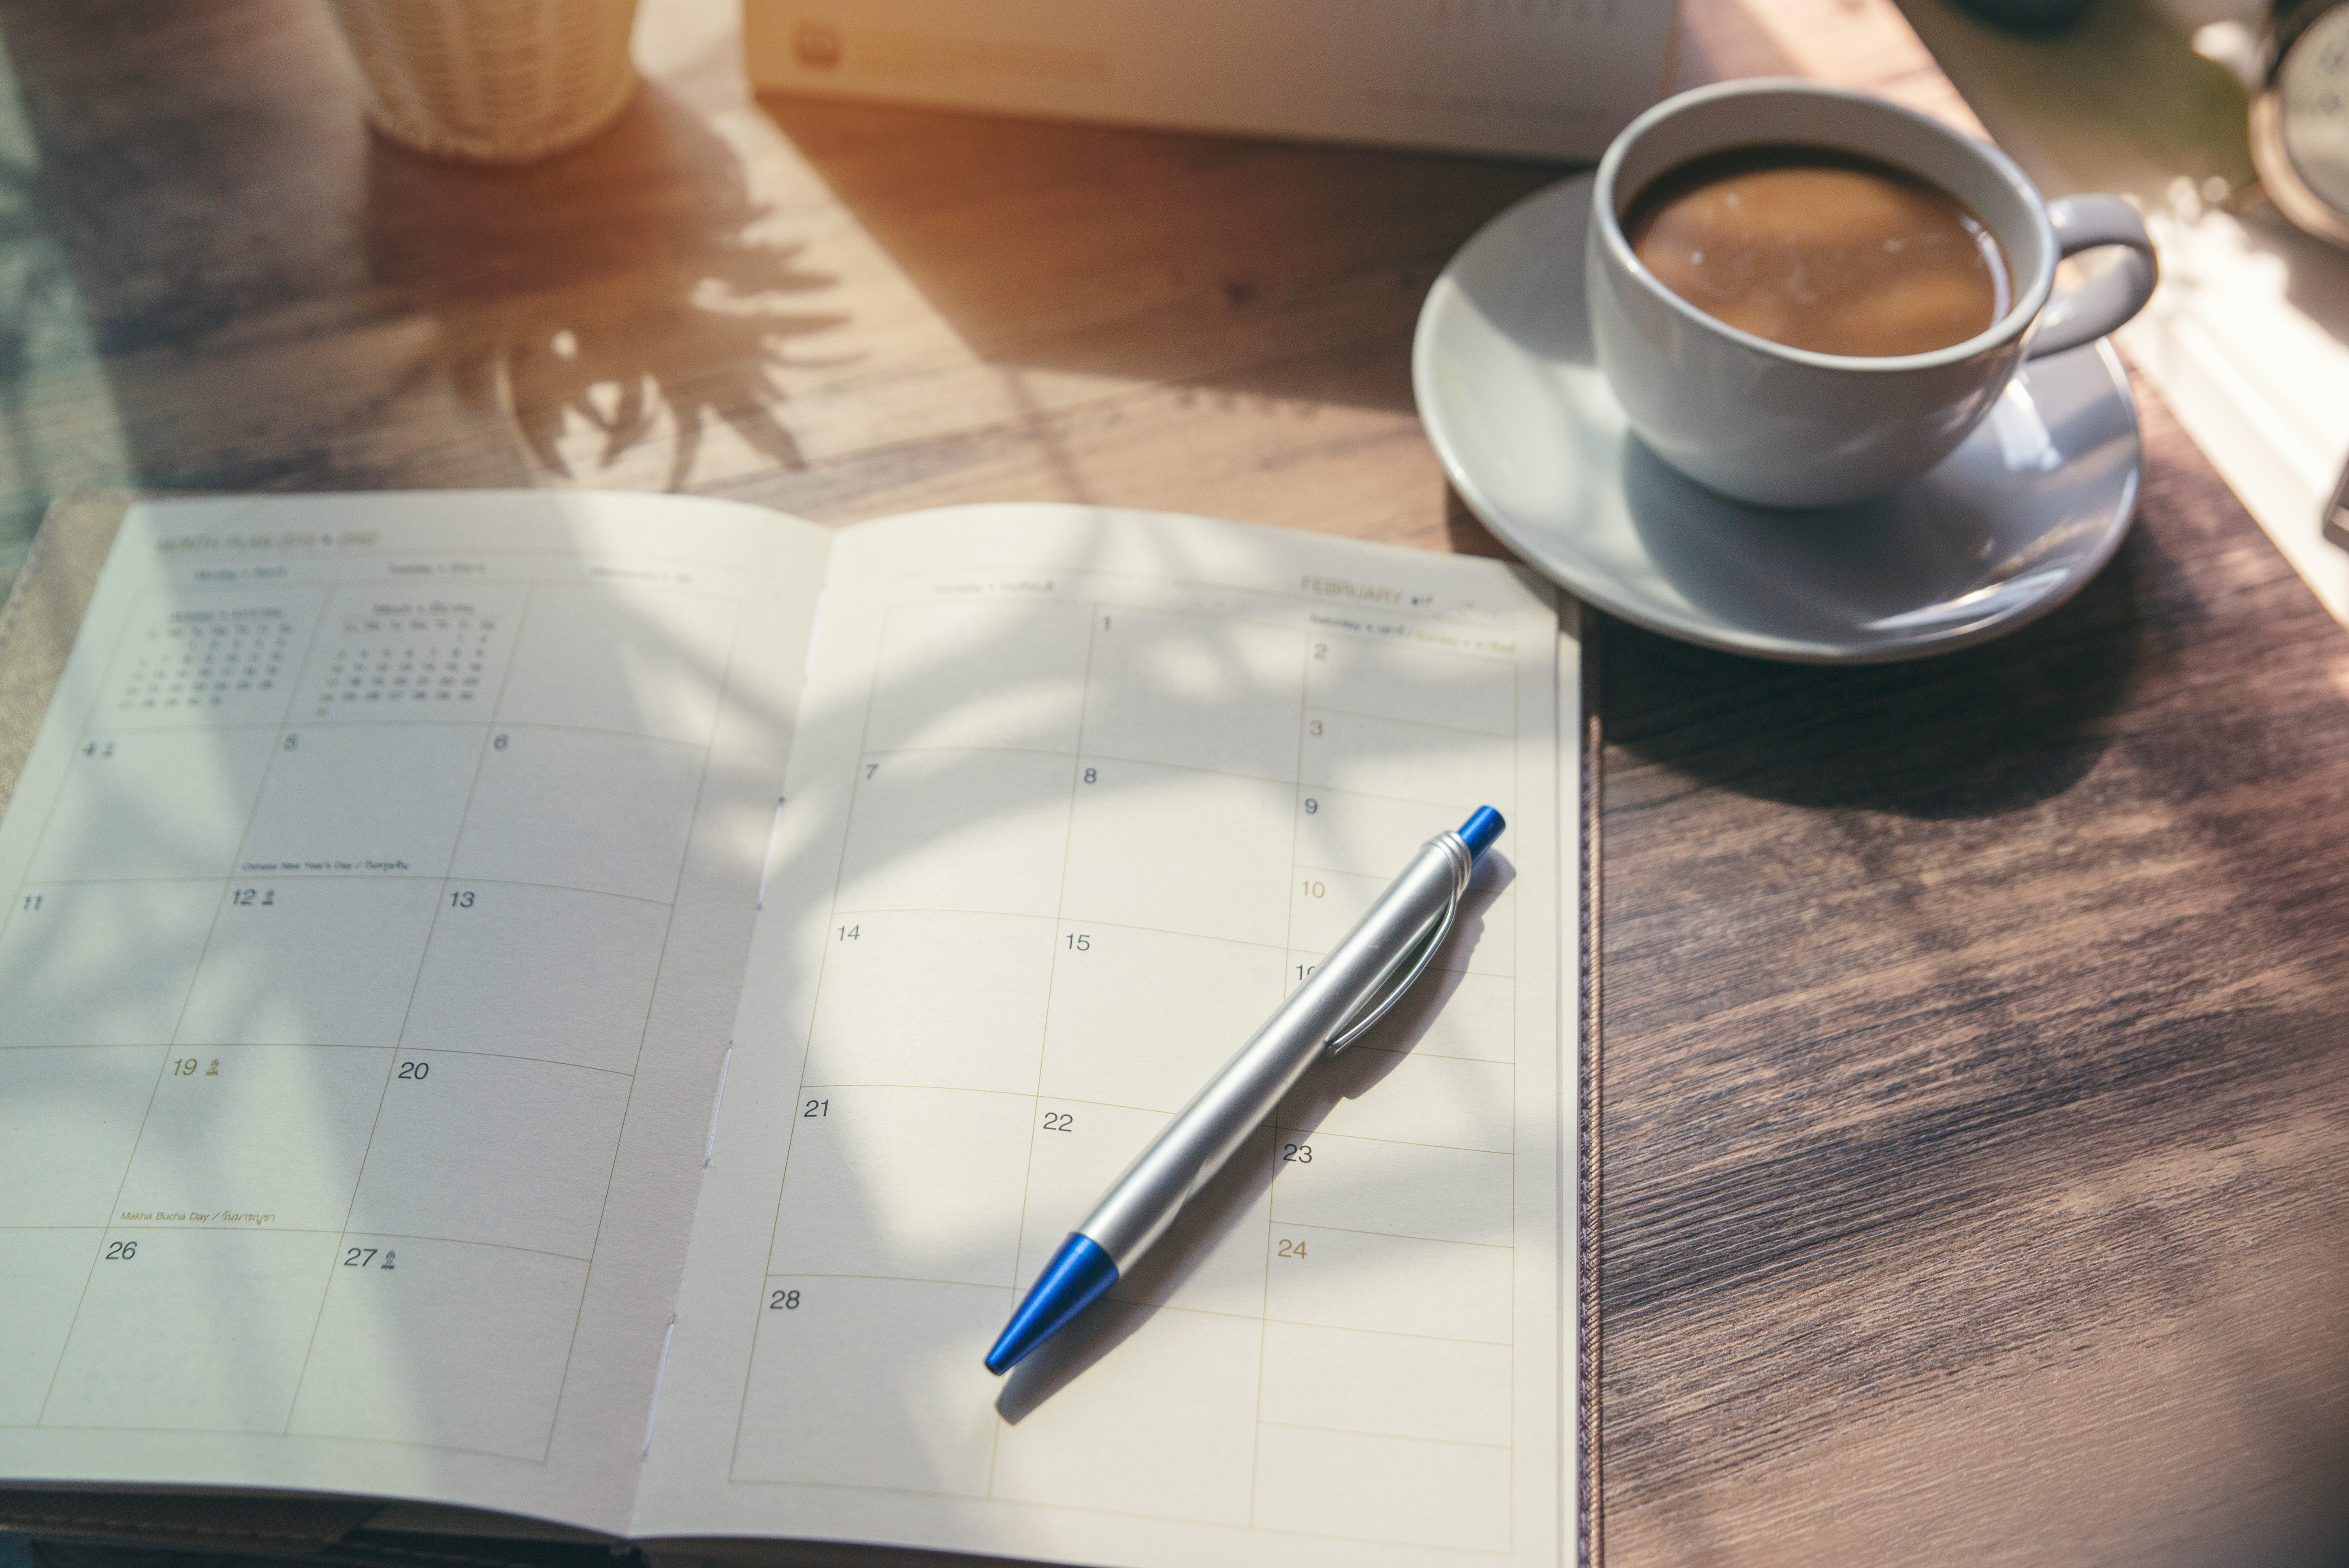 planner on a table with some coffee